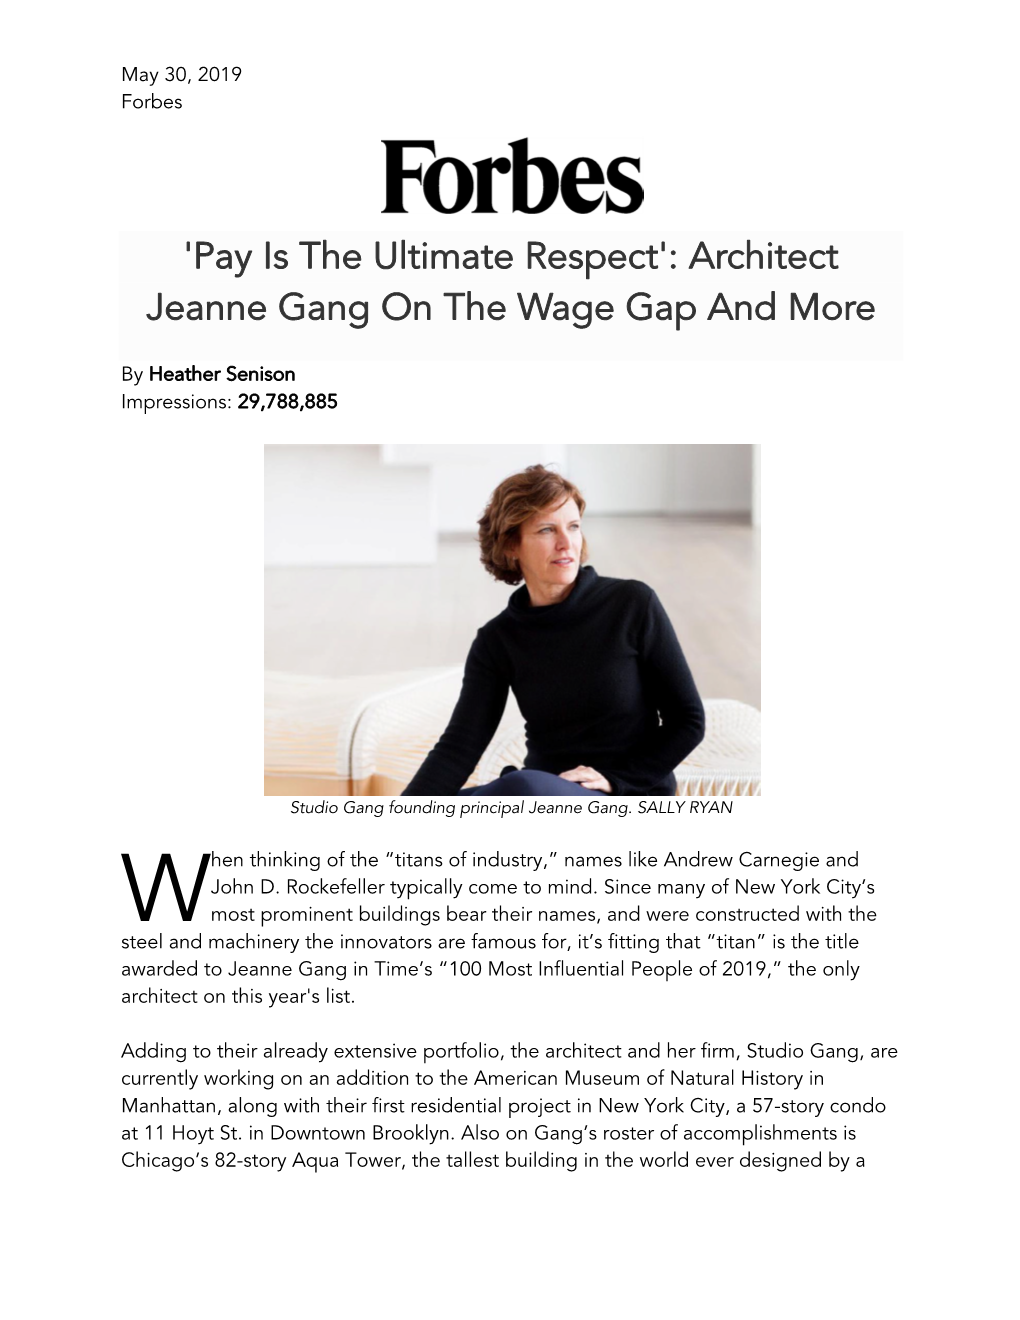 Architect Jeanne Gang on the Wage Gap and More